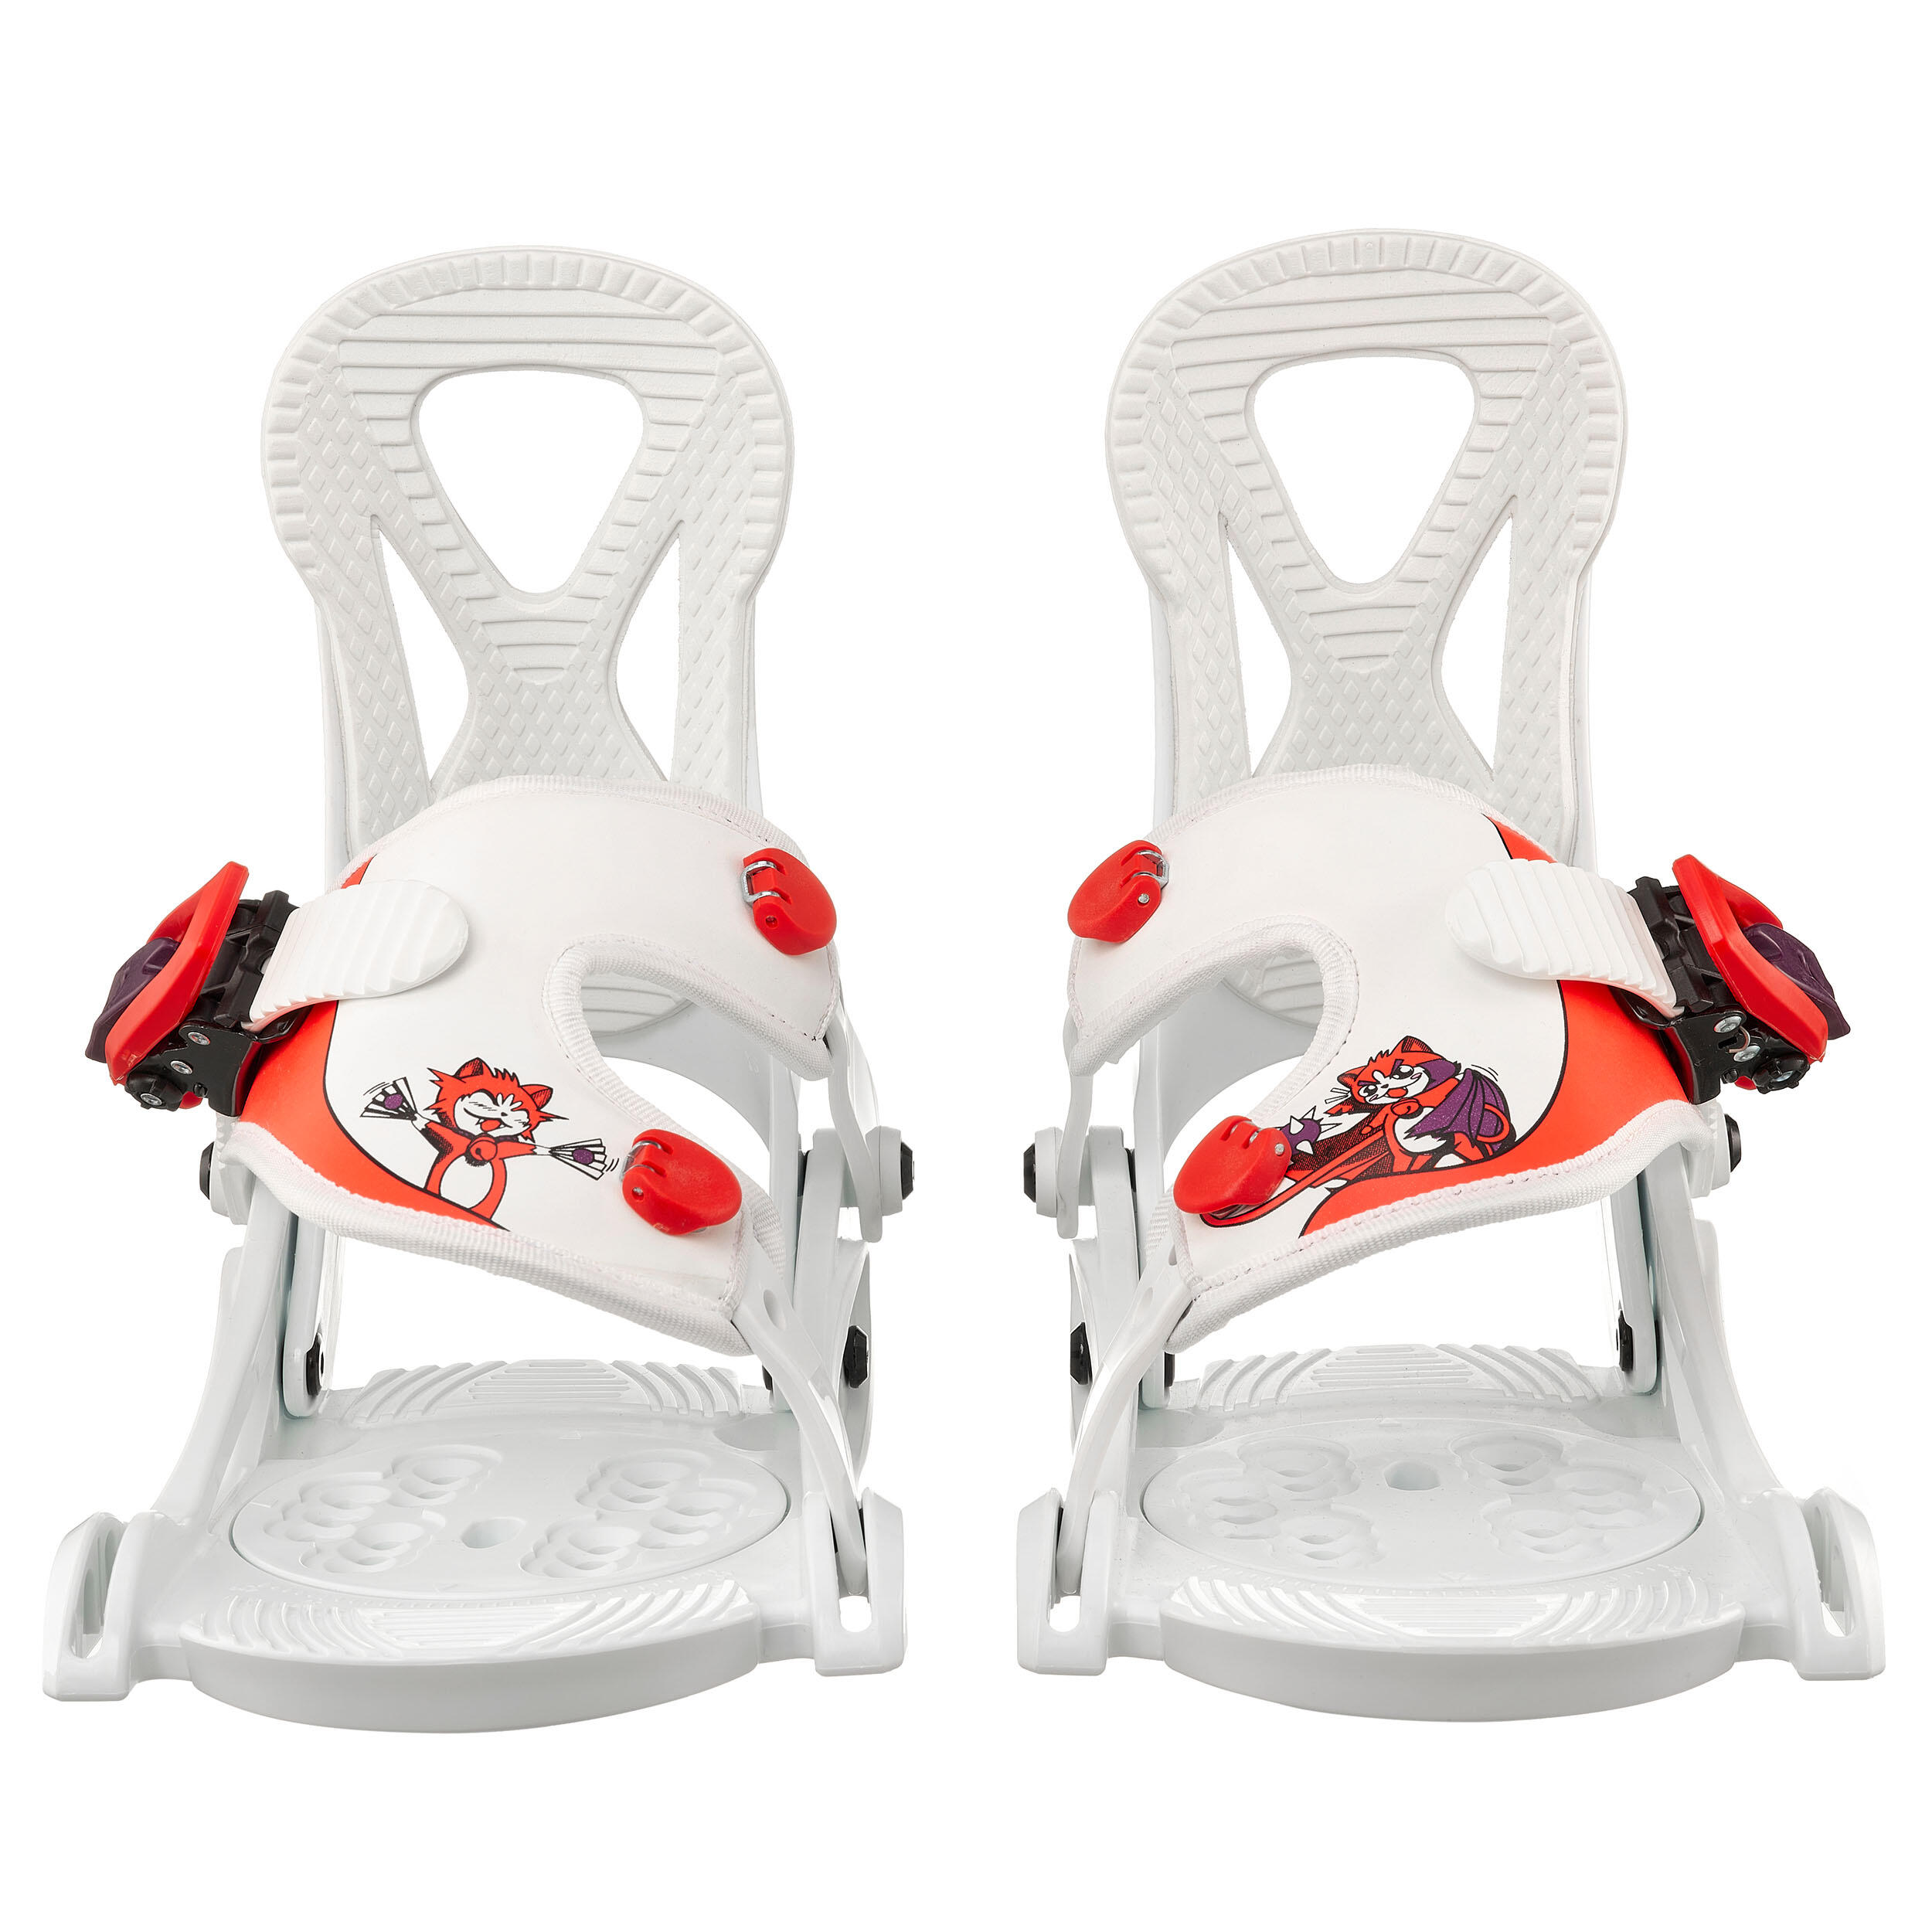 Kids’ Quick Snowboard Bindings  - Faky XS - White and Red 5/9